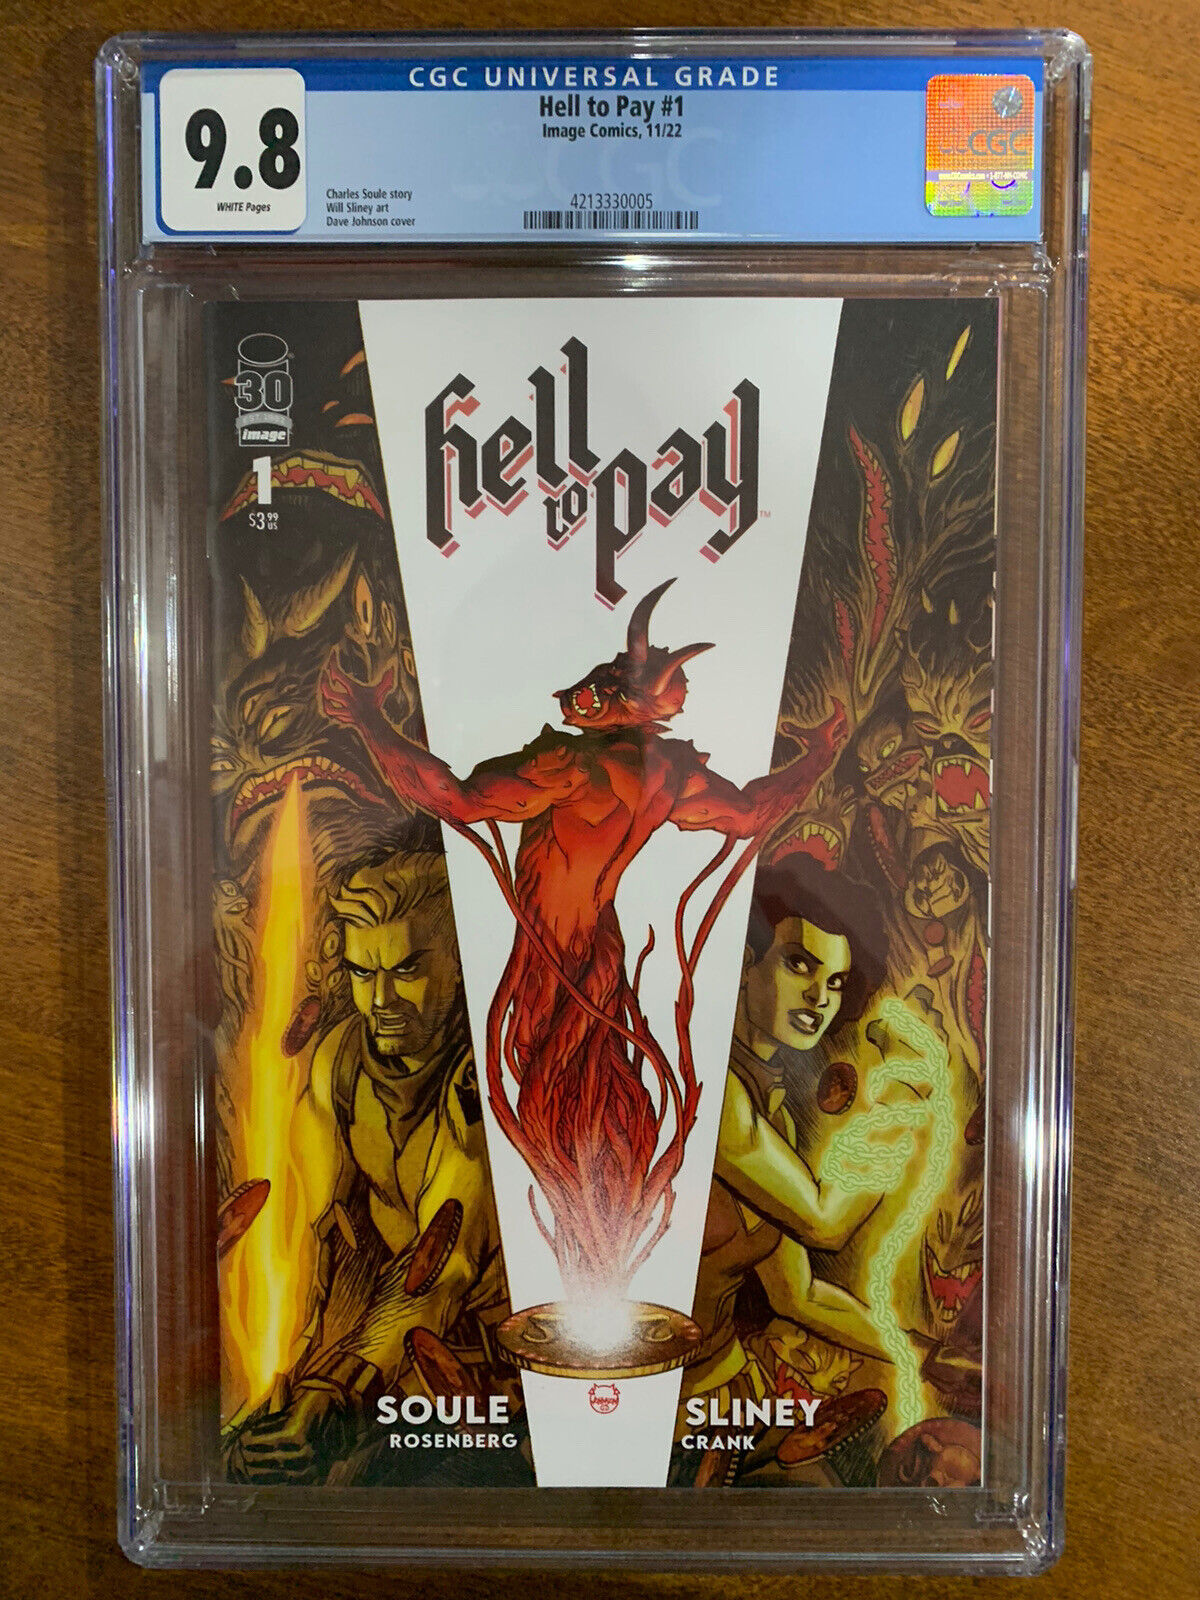 🔥HELL TO PAY #1 - CGC 9.8 - 1st Print Cover A - Seth Macfarlane OPTIONED